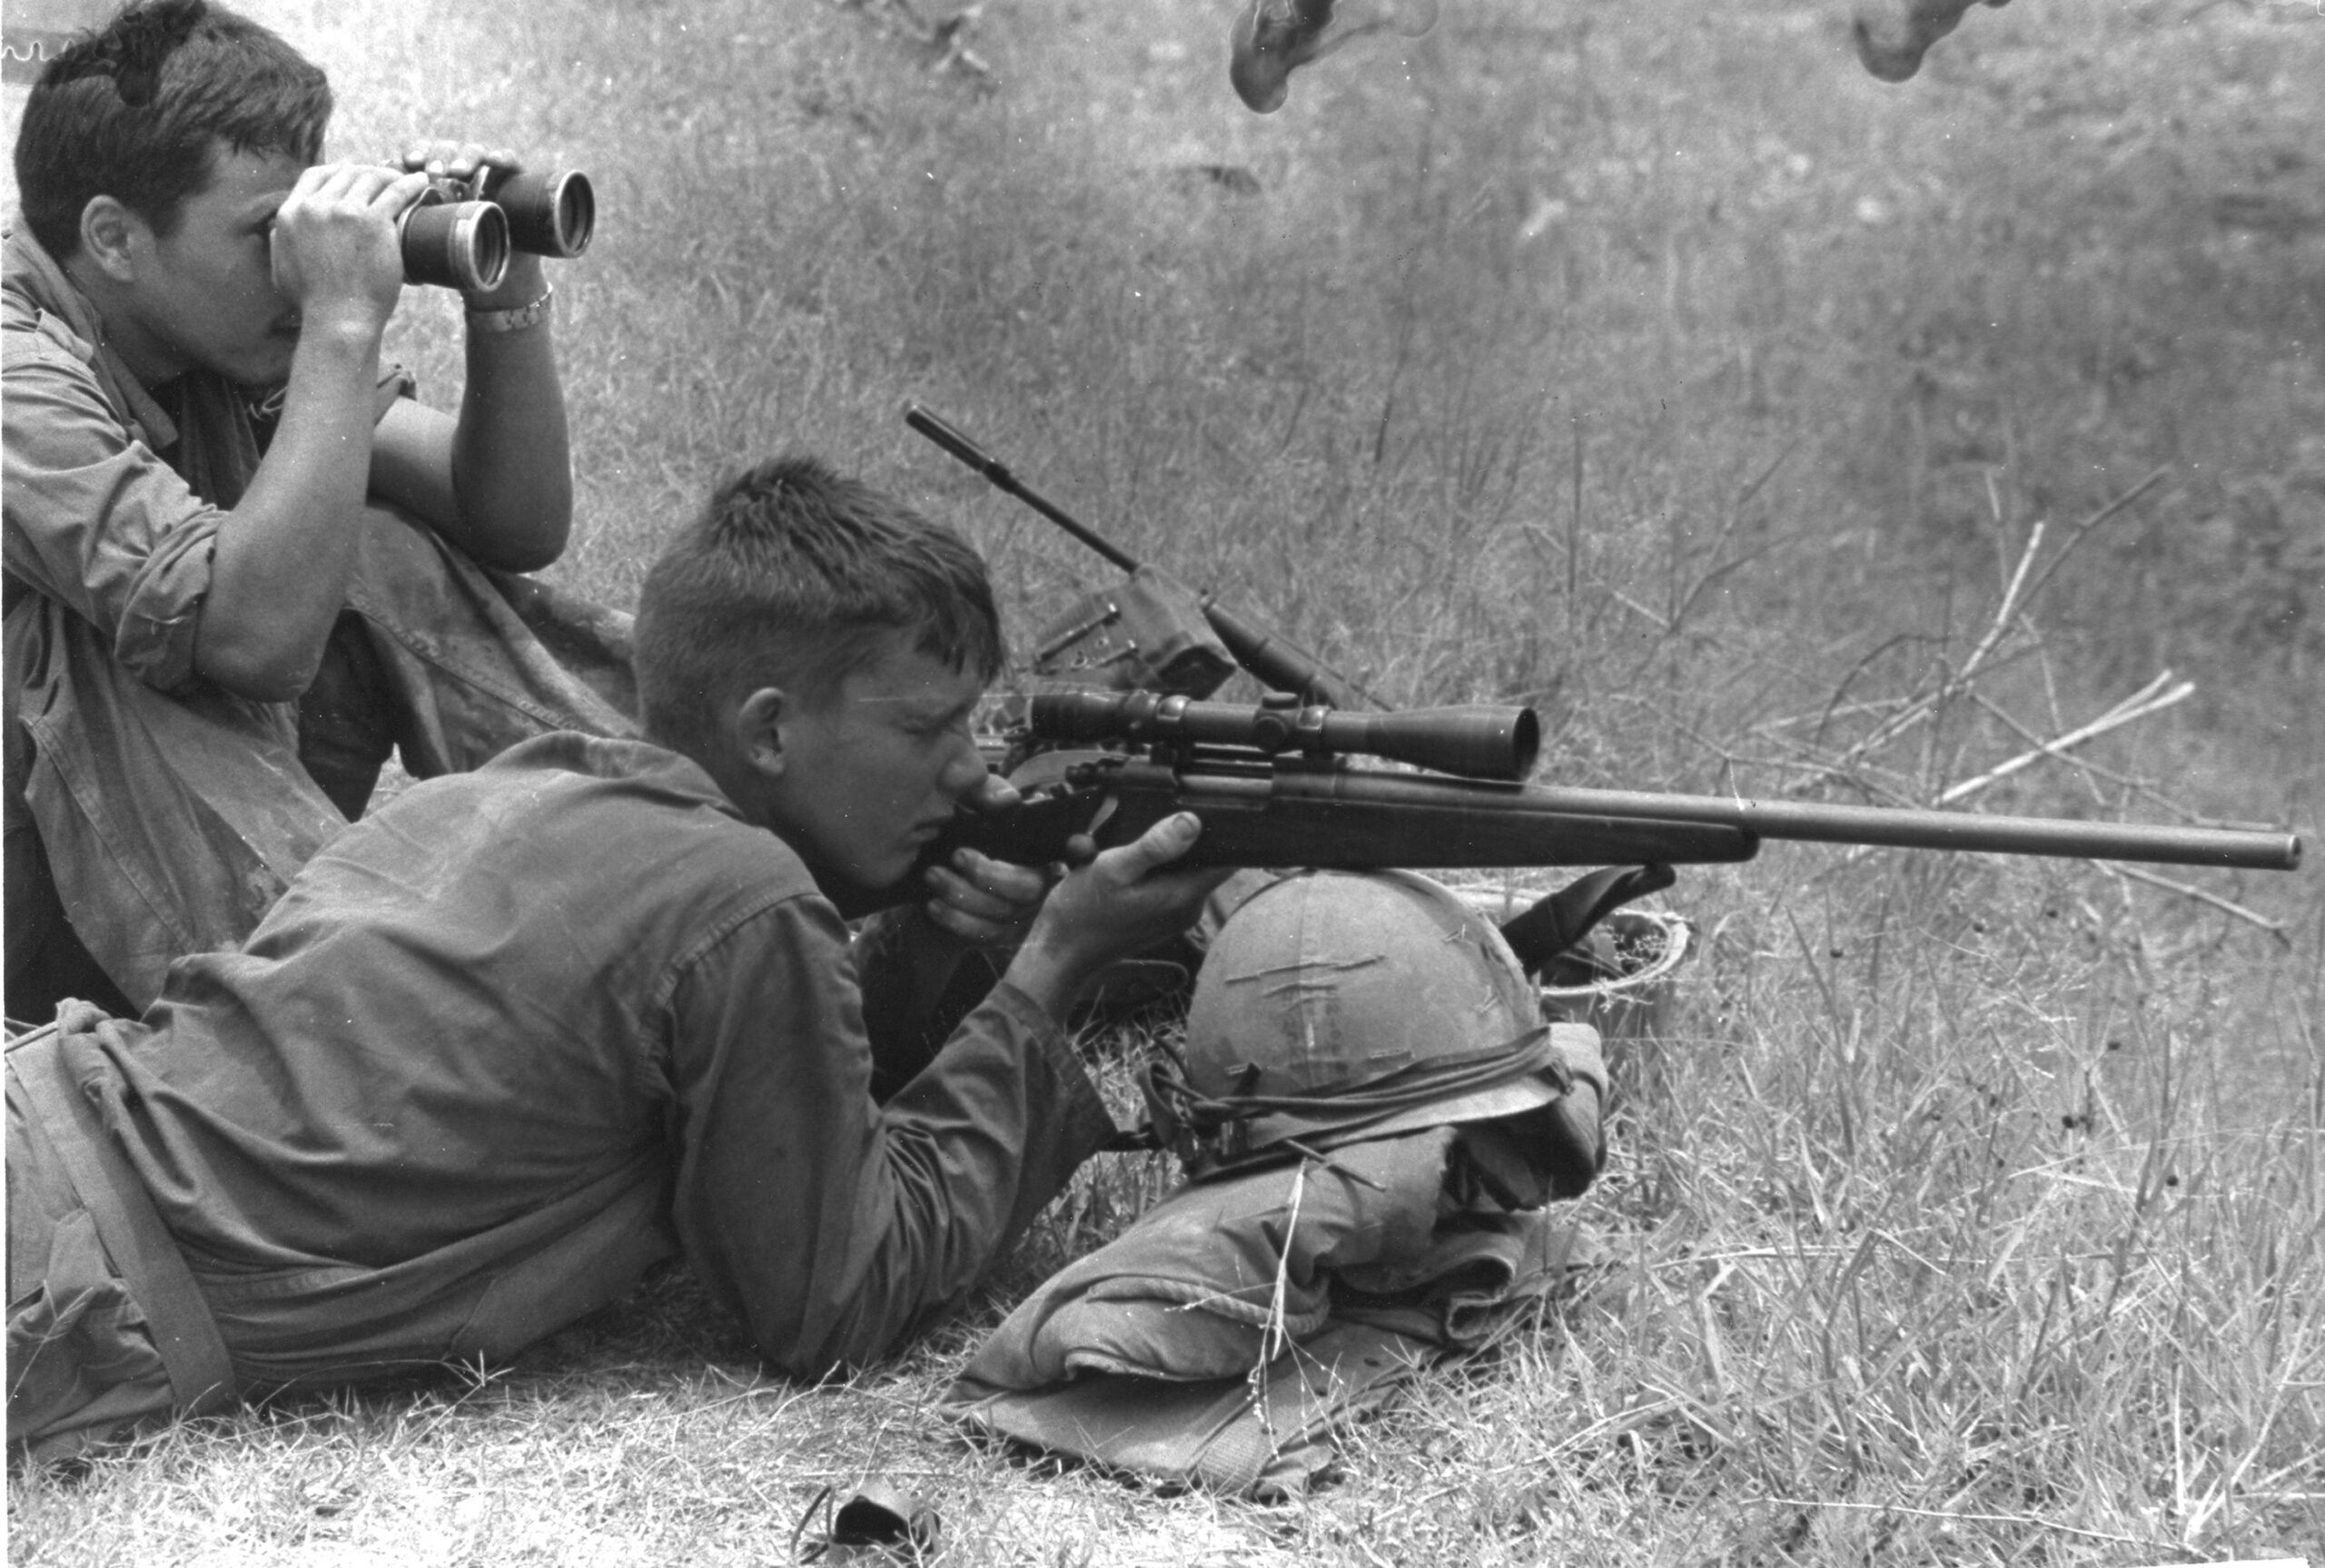 A 7th Marine Regt sniper zeroes in on a distant enemy with his Remington 700 sniper rifle, while his companion watches through binoculars, Da Nang, Vietnam, July 18, 1968. The two were working during Operation Mameluke Thrust. (Photo by PhotoQuest/Getty Images)